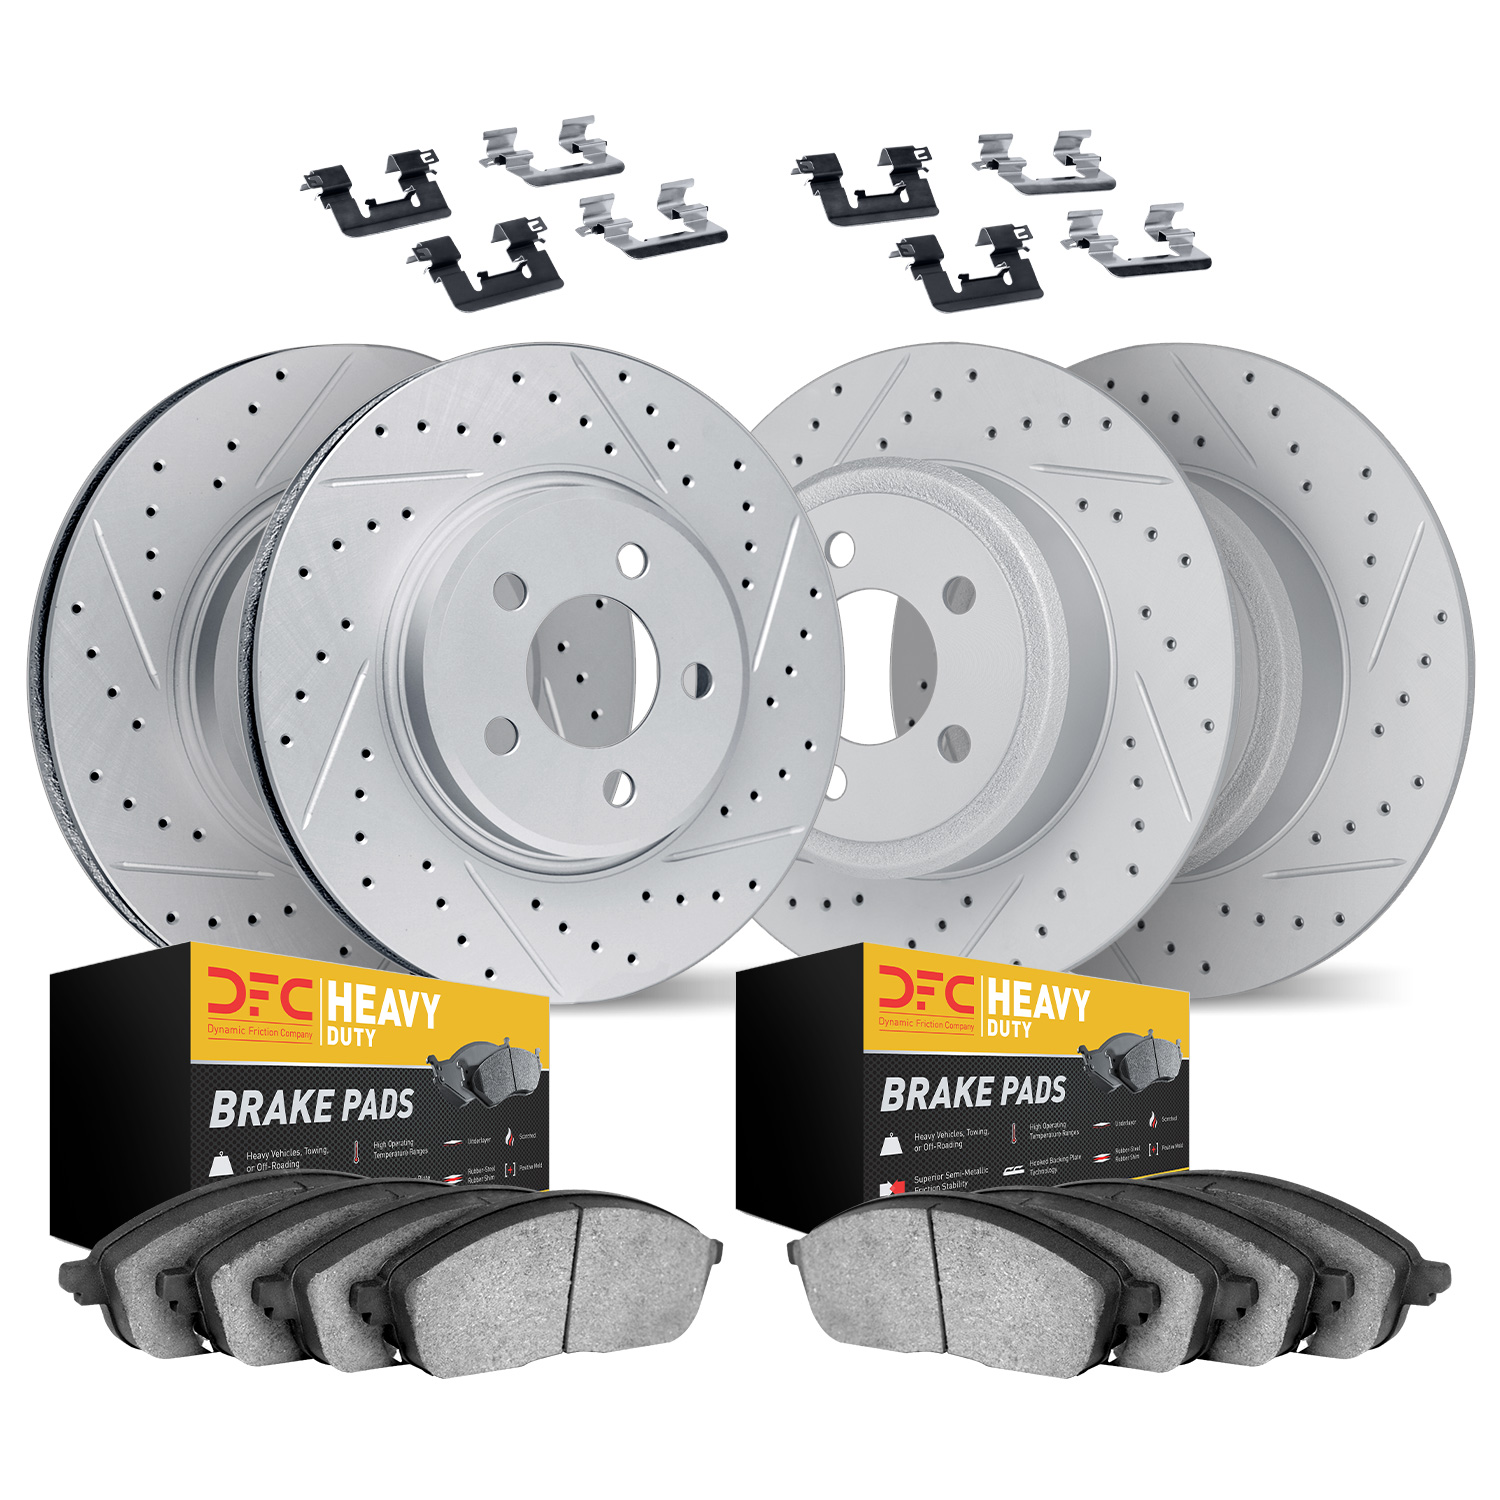 2214-99037 Geoperformance Drilled/Slotted Rotors w/Heavy-Duty Pads Kit & Hardware, 1995-2002 Ford/Lincoln/Mercury/Mazda, Positio